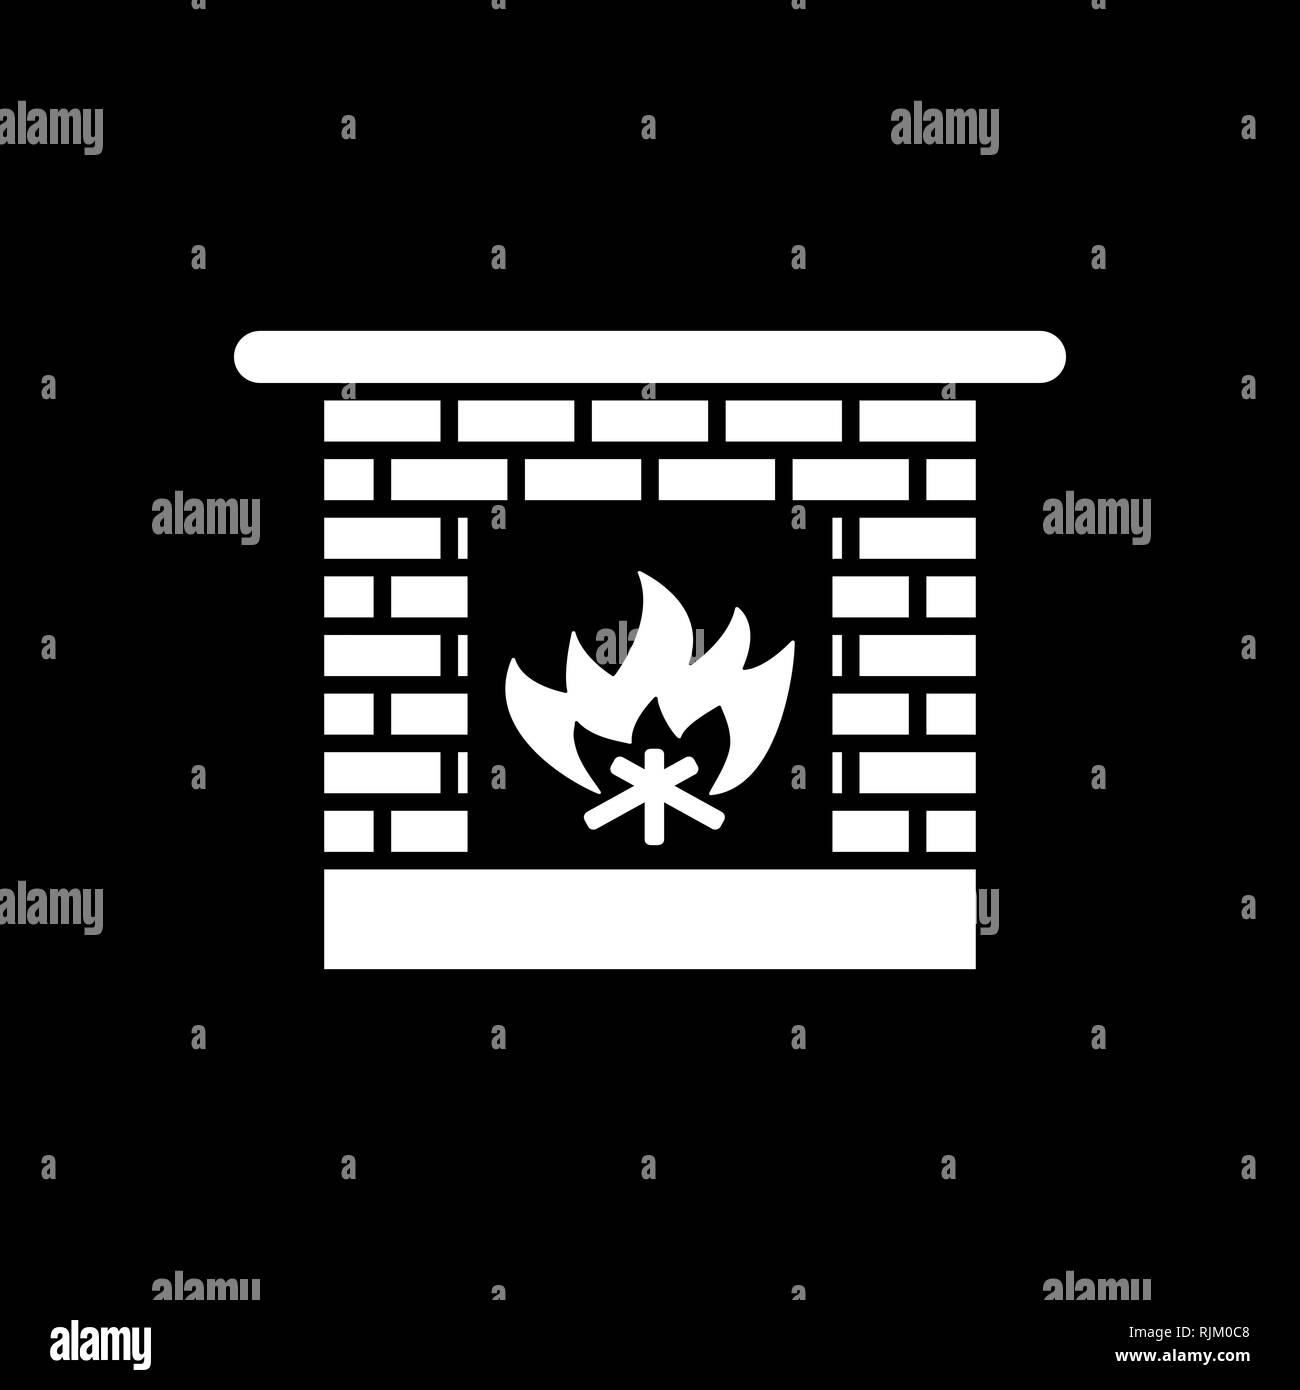 Fireplace icon. Hearth and chimney, fire, mantelpiece, heat symbol. Flat design. Stock - Vector illustration. Stock Vector